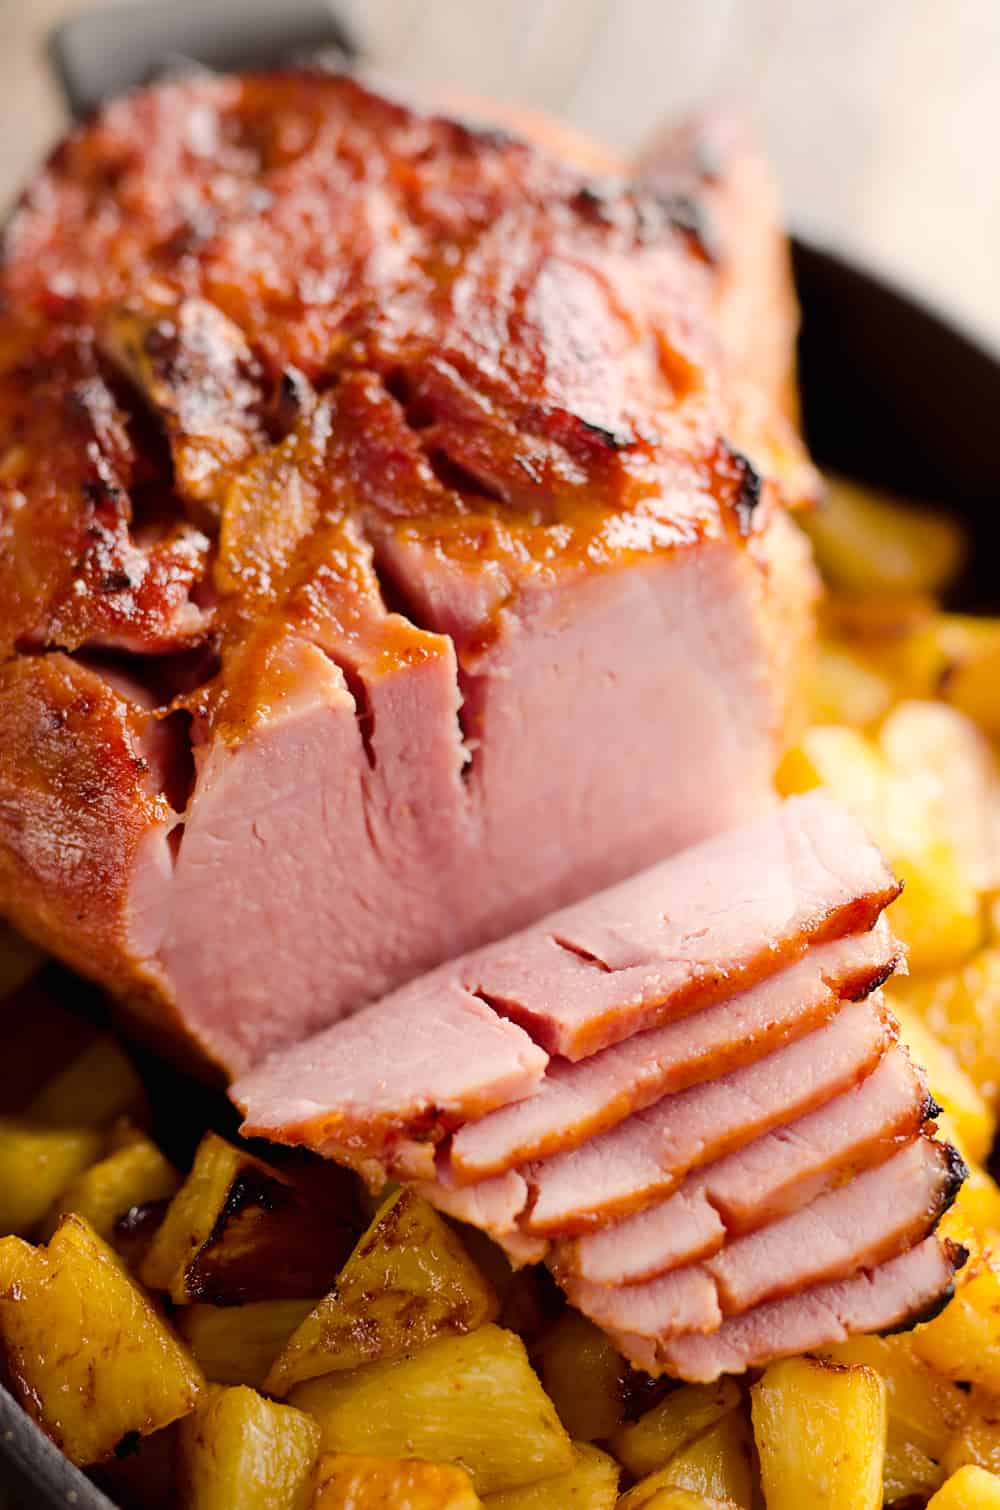 Roasted Pineapple & Chipotle Honey Ham is a sweet and spicy twist on your traditional holiday meal. This easy recipe is finished off with fresh pineapple roasted to sweet perfection for a perfect compliment to the salty and smoky ham. 